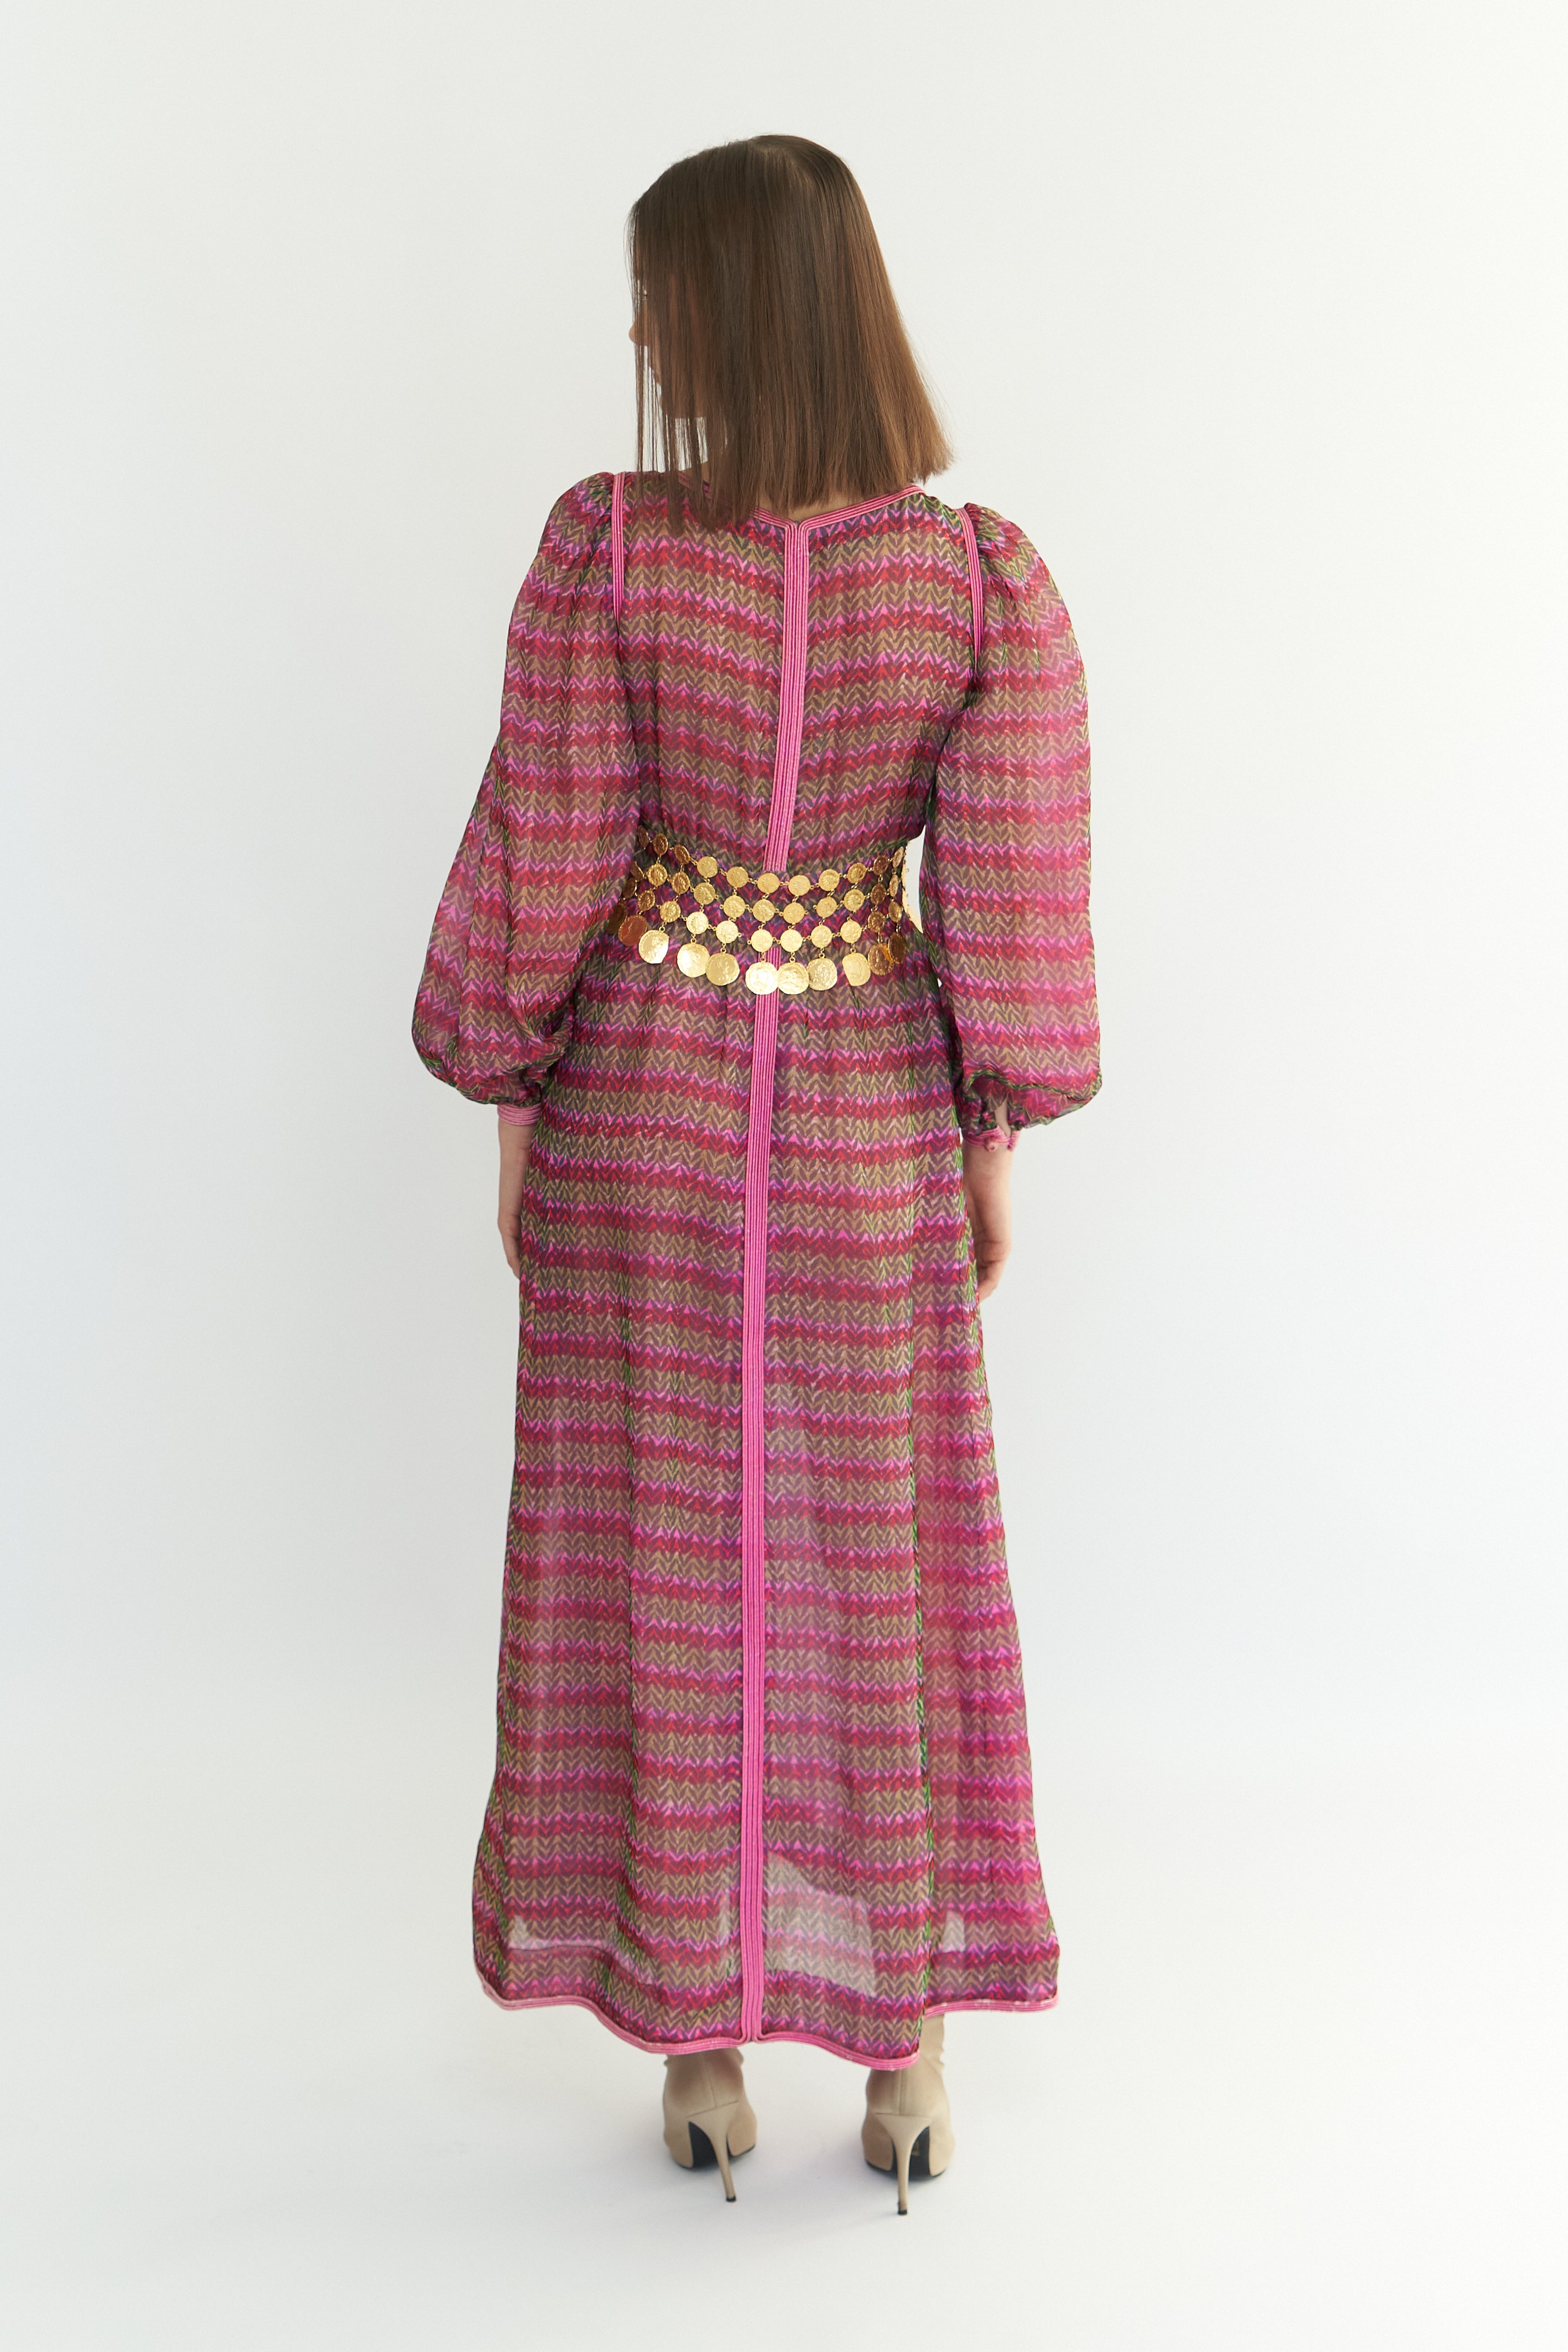 Givenchy <br> A/W 1977 Haute Couture silk chiffon print gown with gold coins